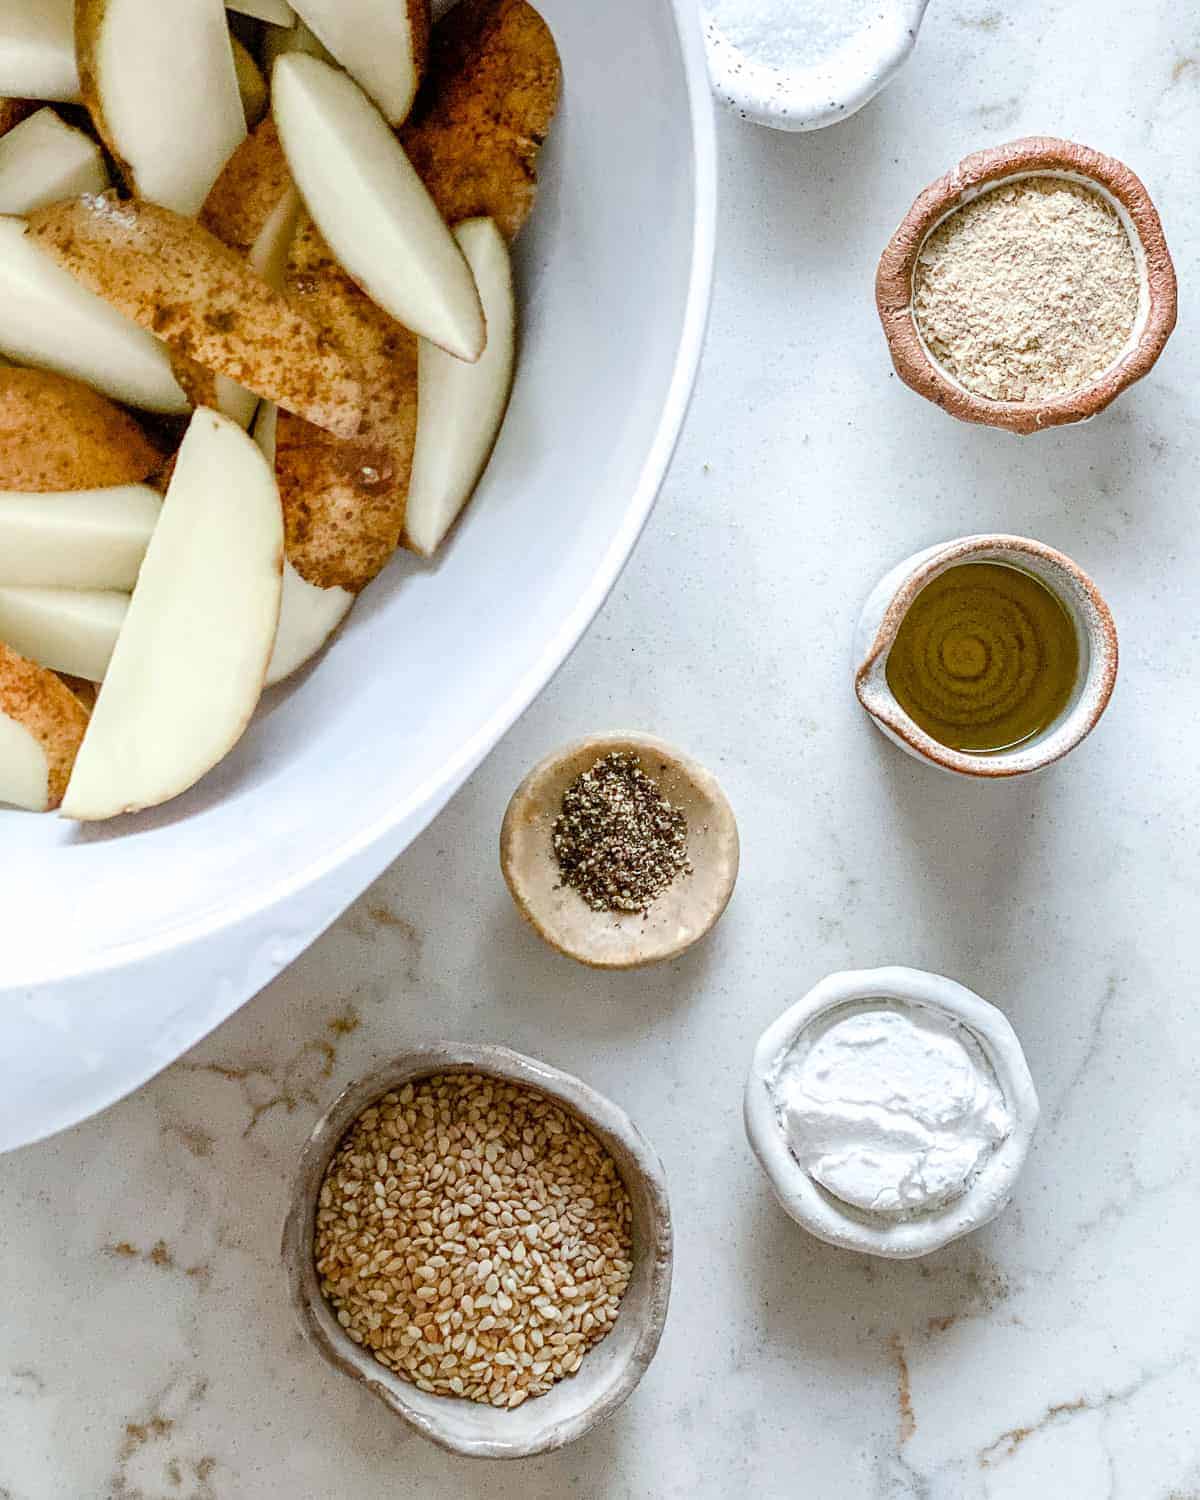 ingredients for oven baked sesame fries against a white surface